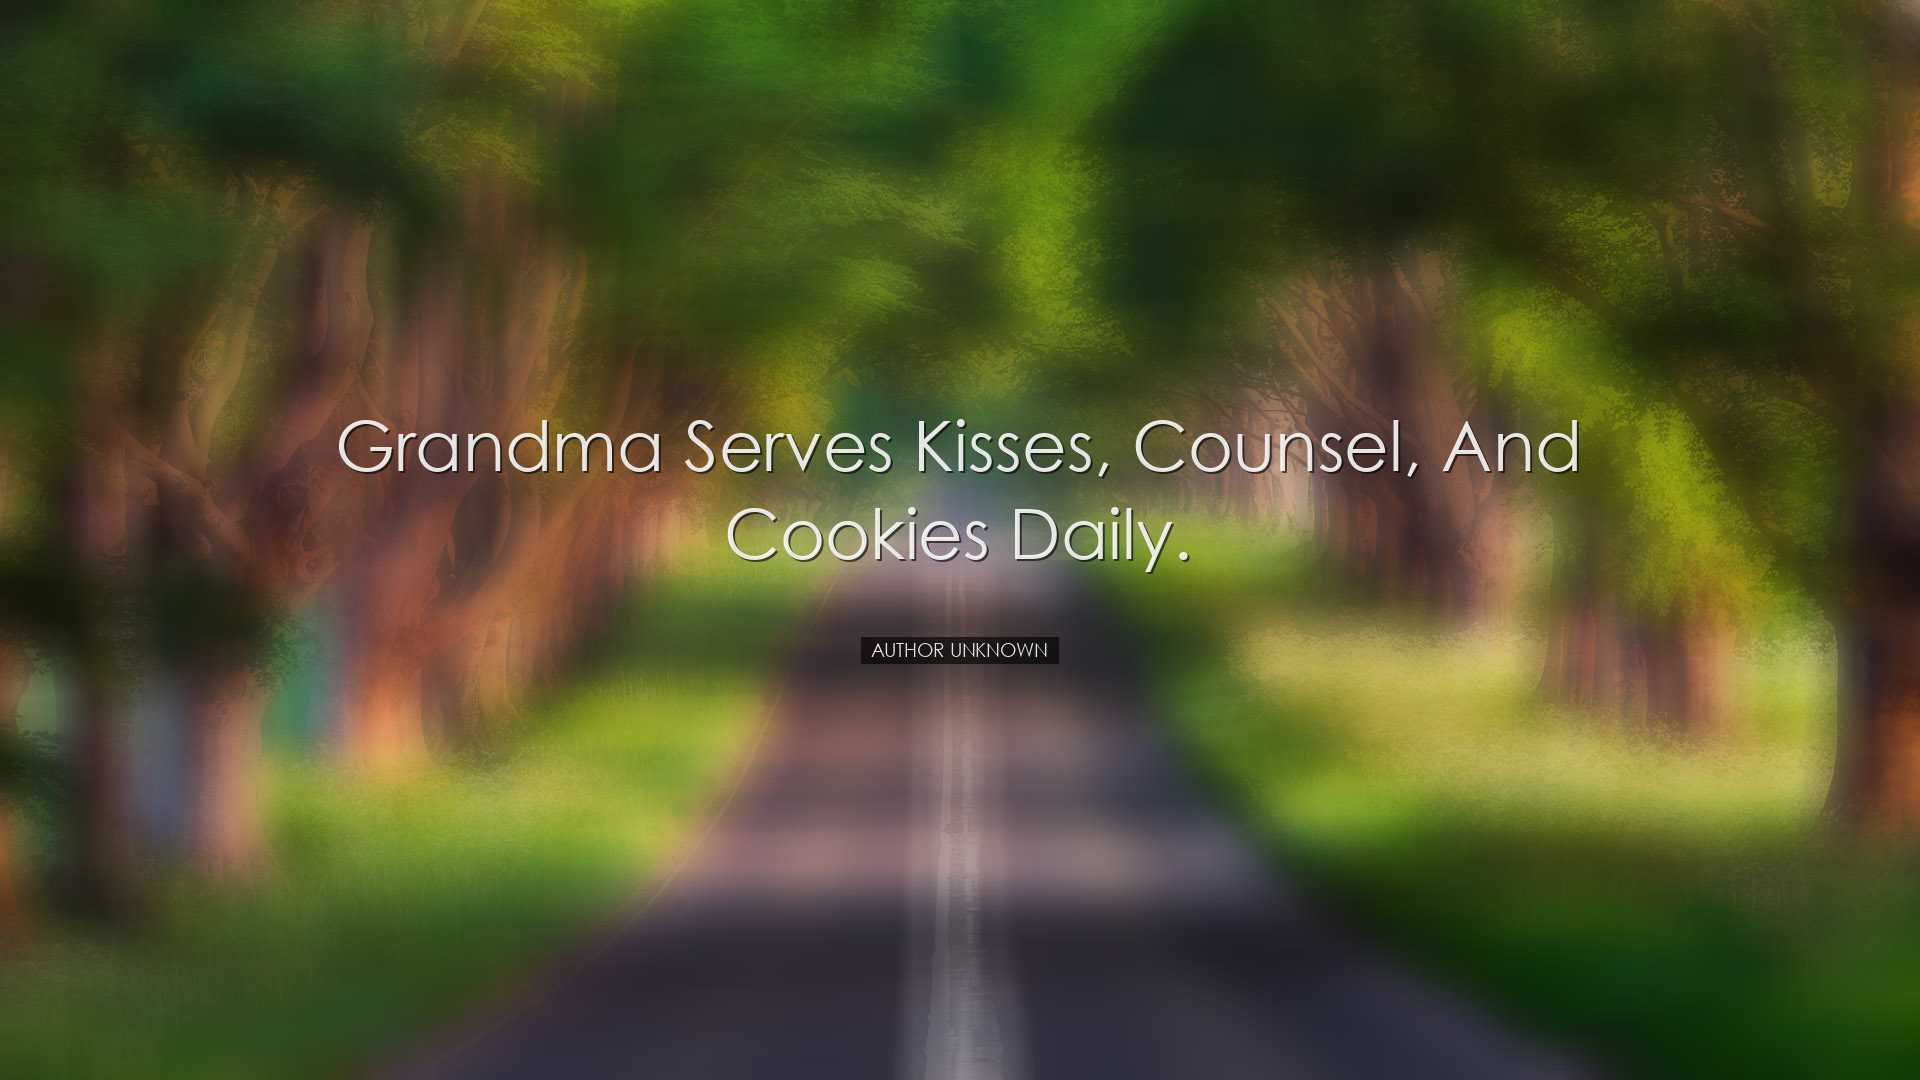 Grandma serves kisses, counsel, and cookies daily. - Author Unknow